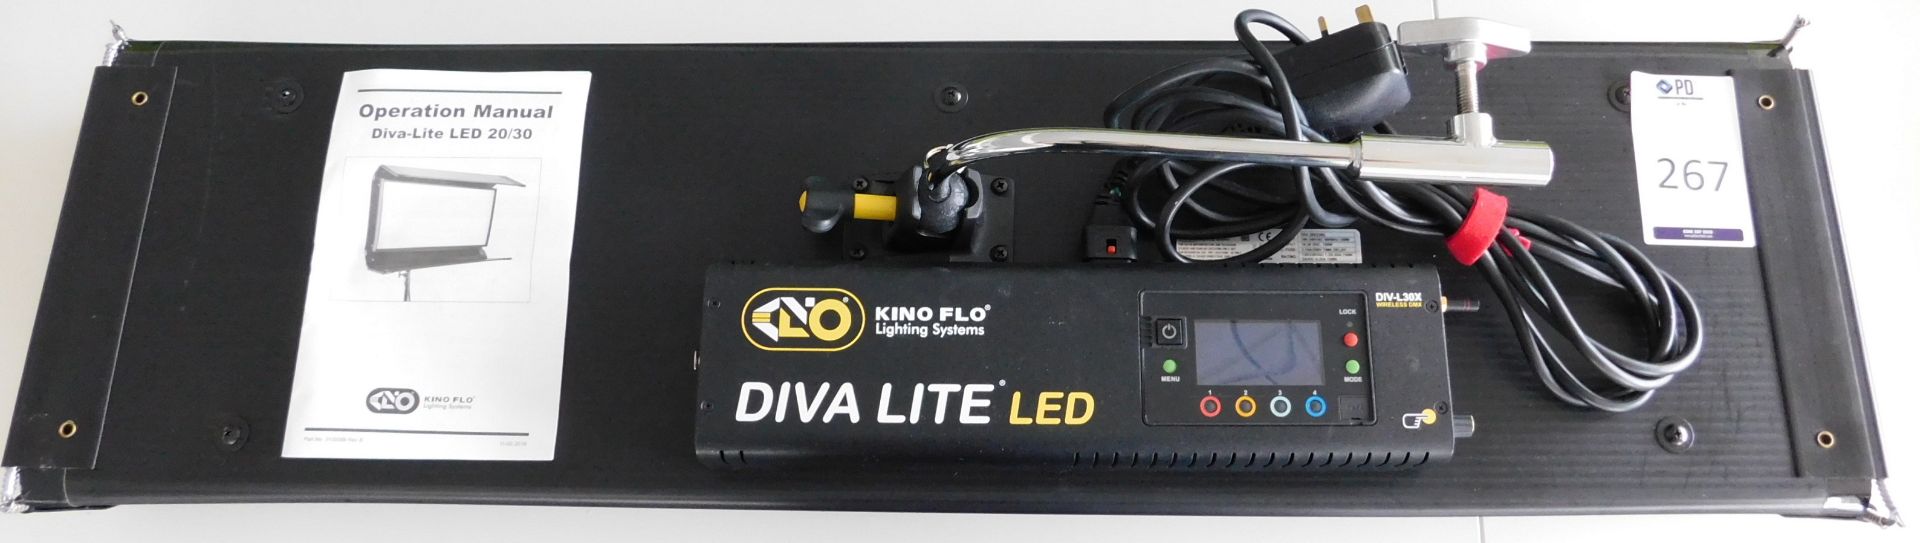 Kino Flo DIV-L30X Diva Lite LED (Location: Westminster. Please Refer to General Notes) - Image 2 of 3